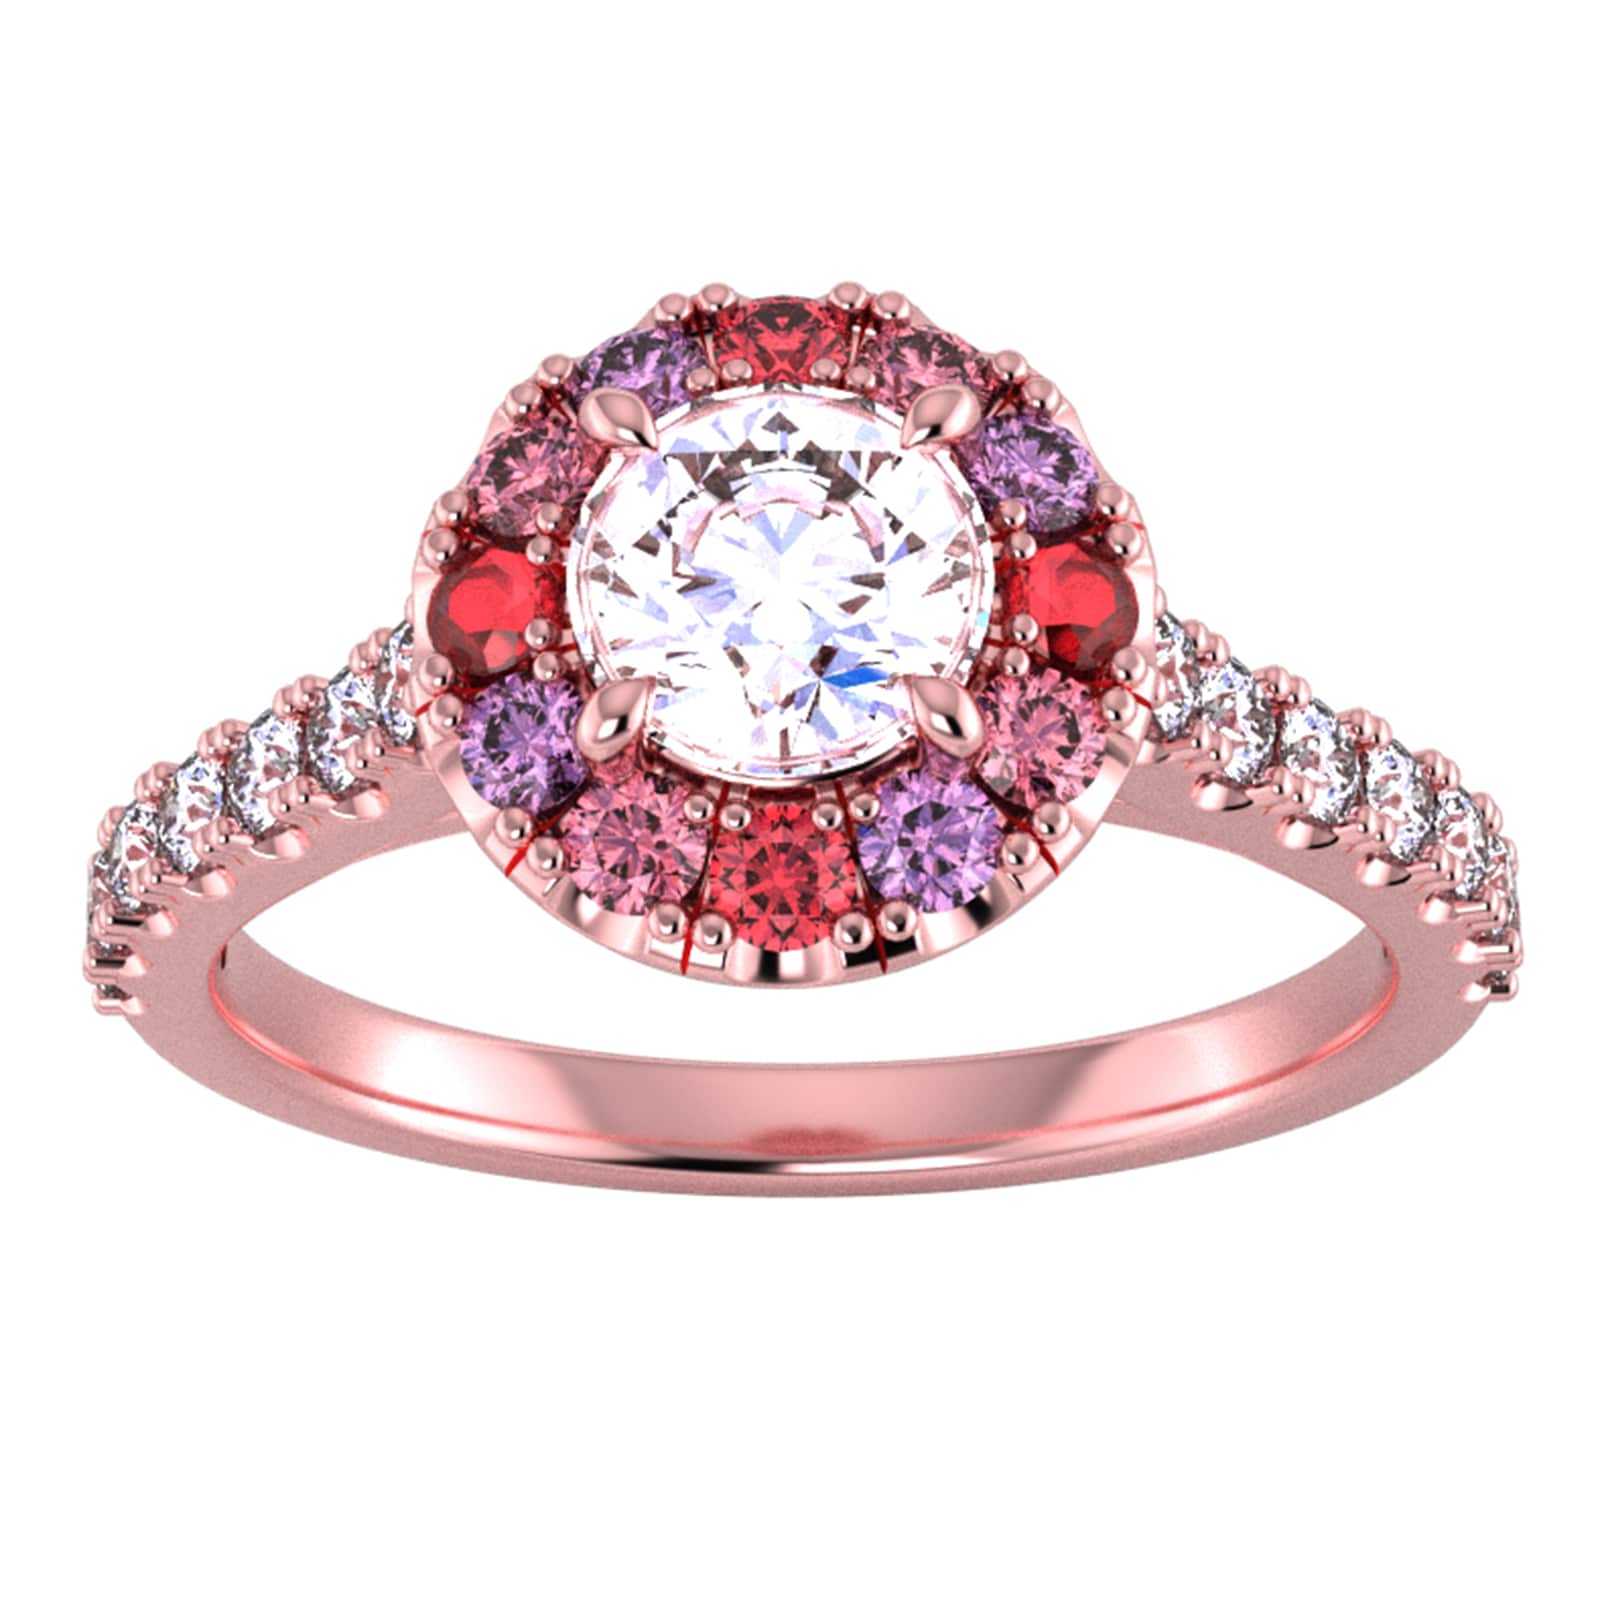 18ct Rose Gold Diamond & Pink, Red, Purple Sapphire Halo Ring - Ring Size A